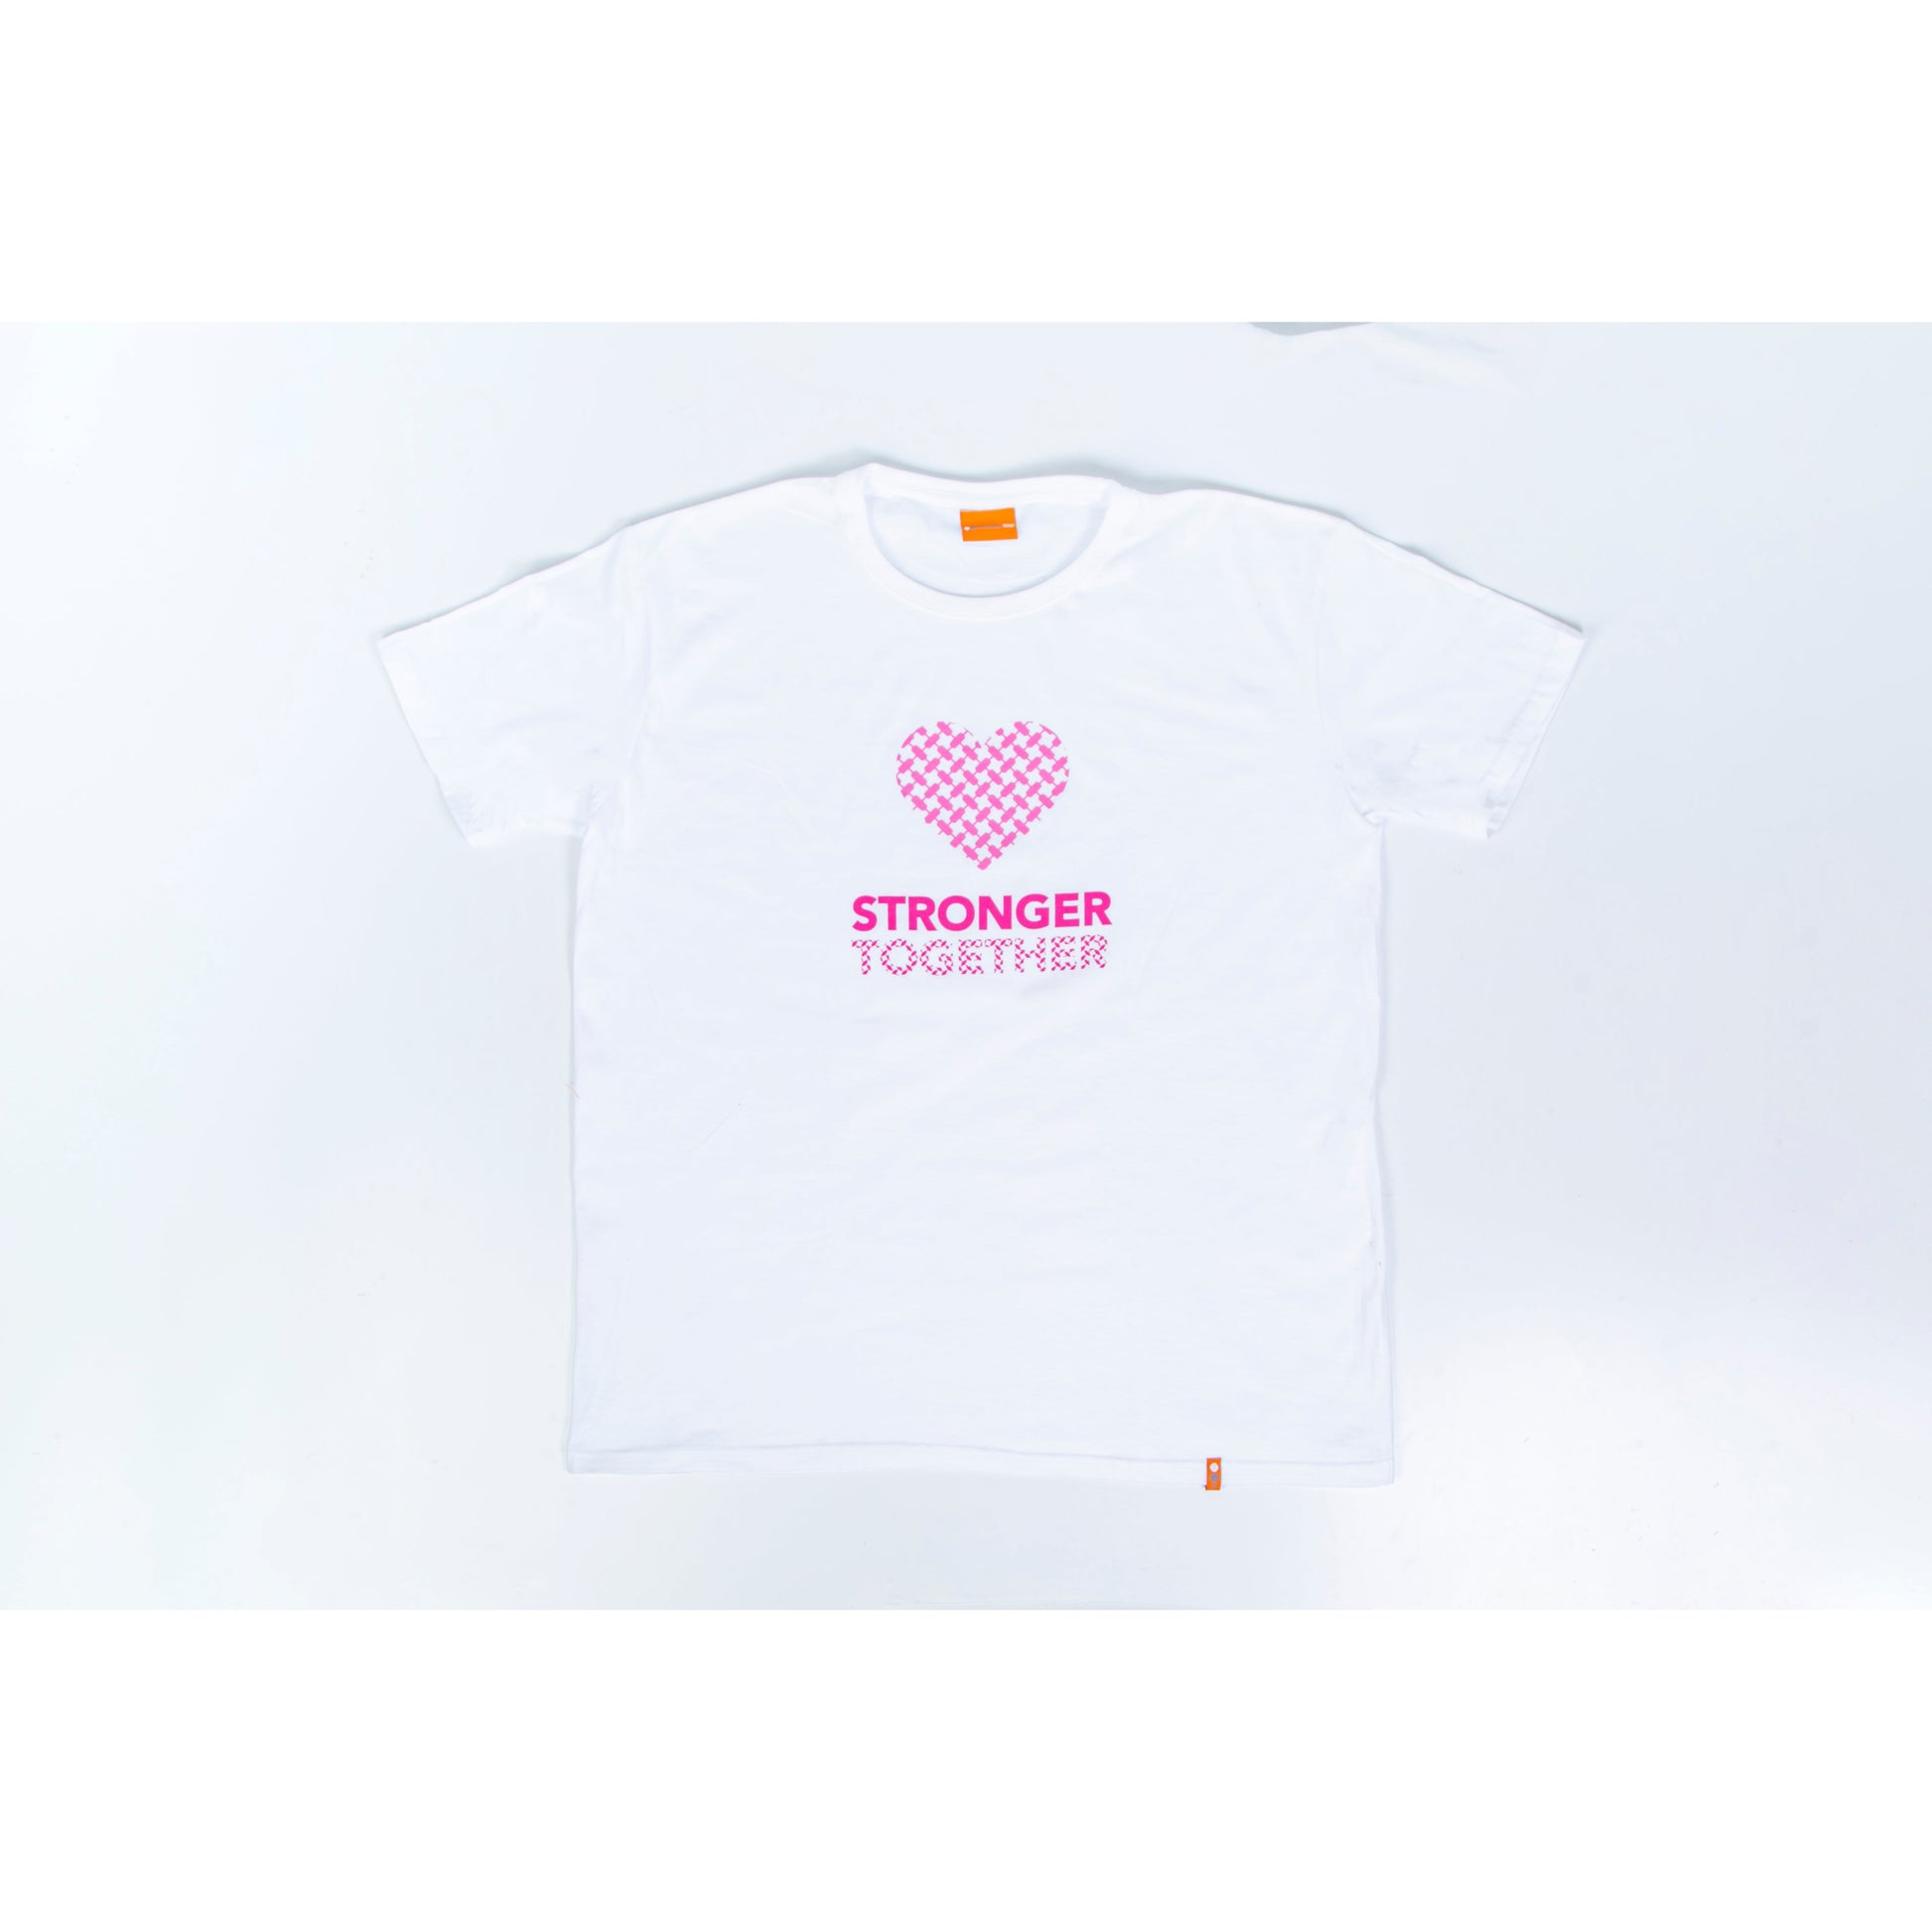 T-shirt in white color - Stronger together - Breast cancer